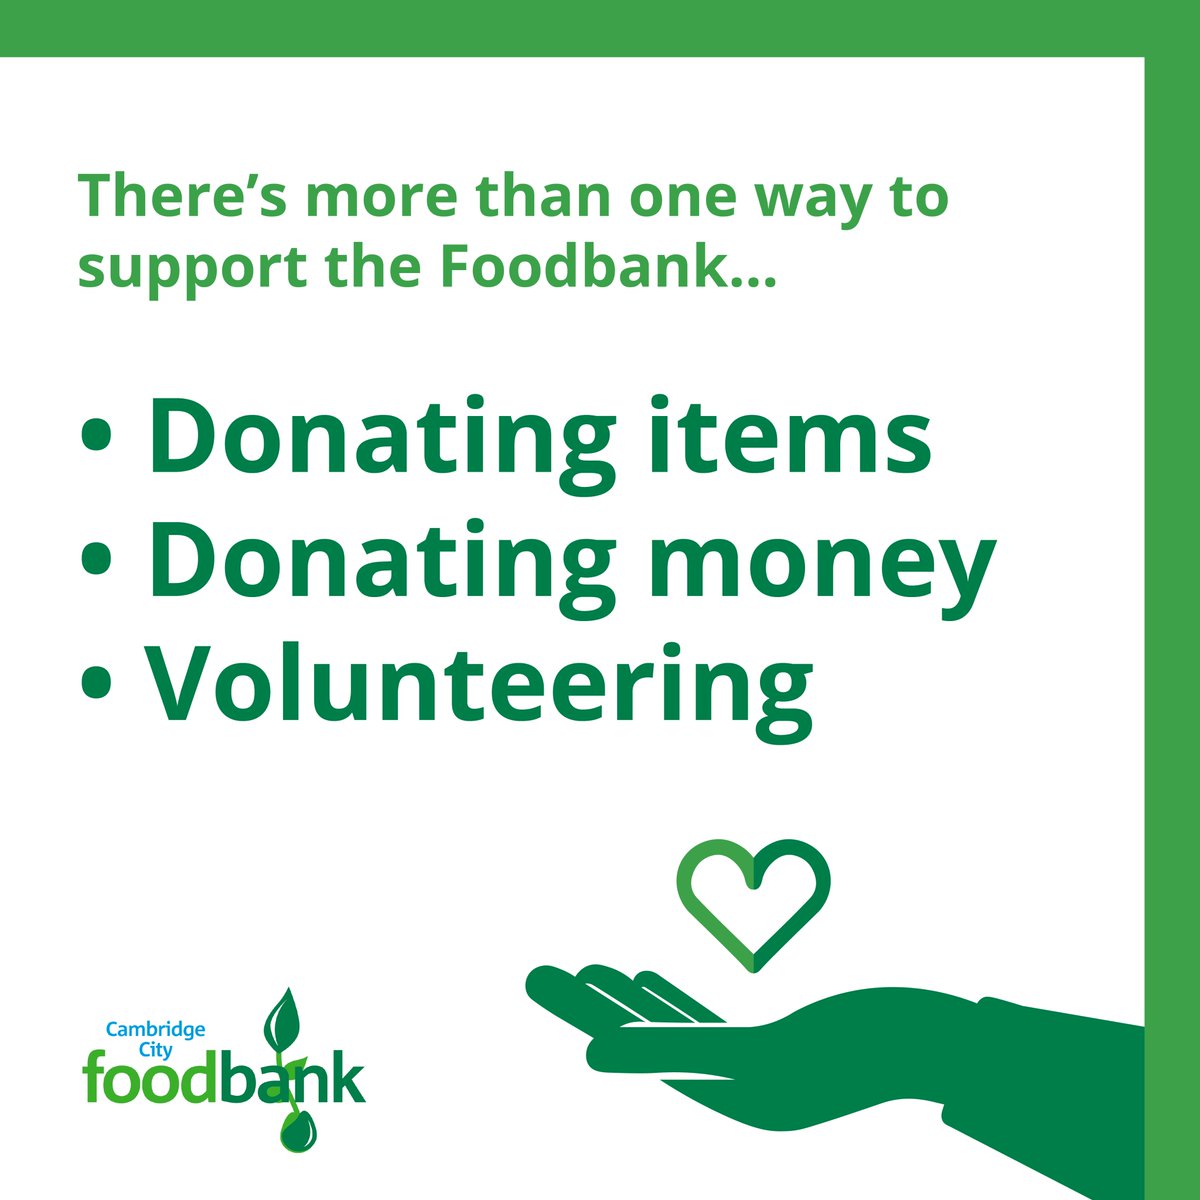 In February, inflation fell by 0.6%, putting the rise in the #CostOfLiving at its slowest pace since 2021. However living costs remain high, and people still need our support. To support those in need, visit: cambridgecity.foodbank.org.uk/give-help/